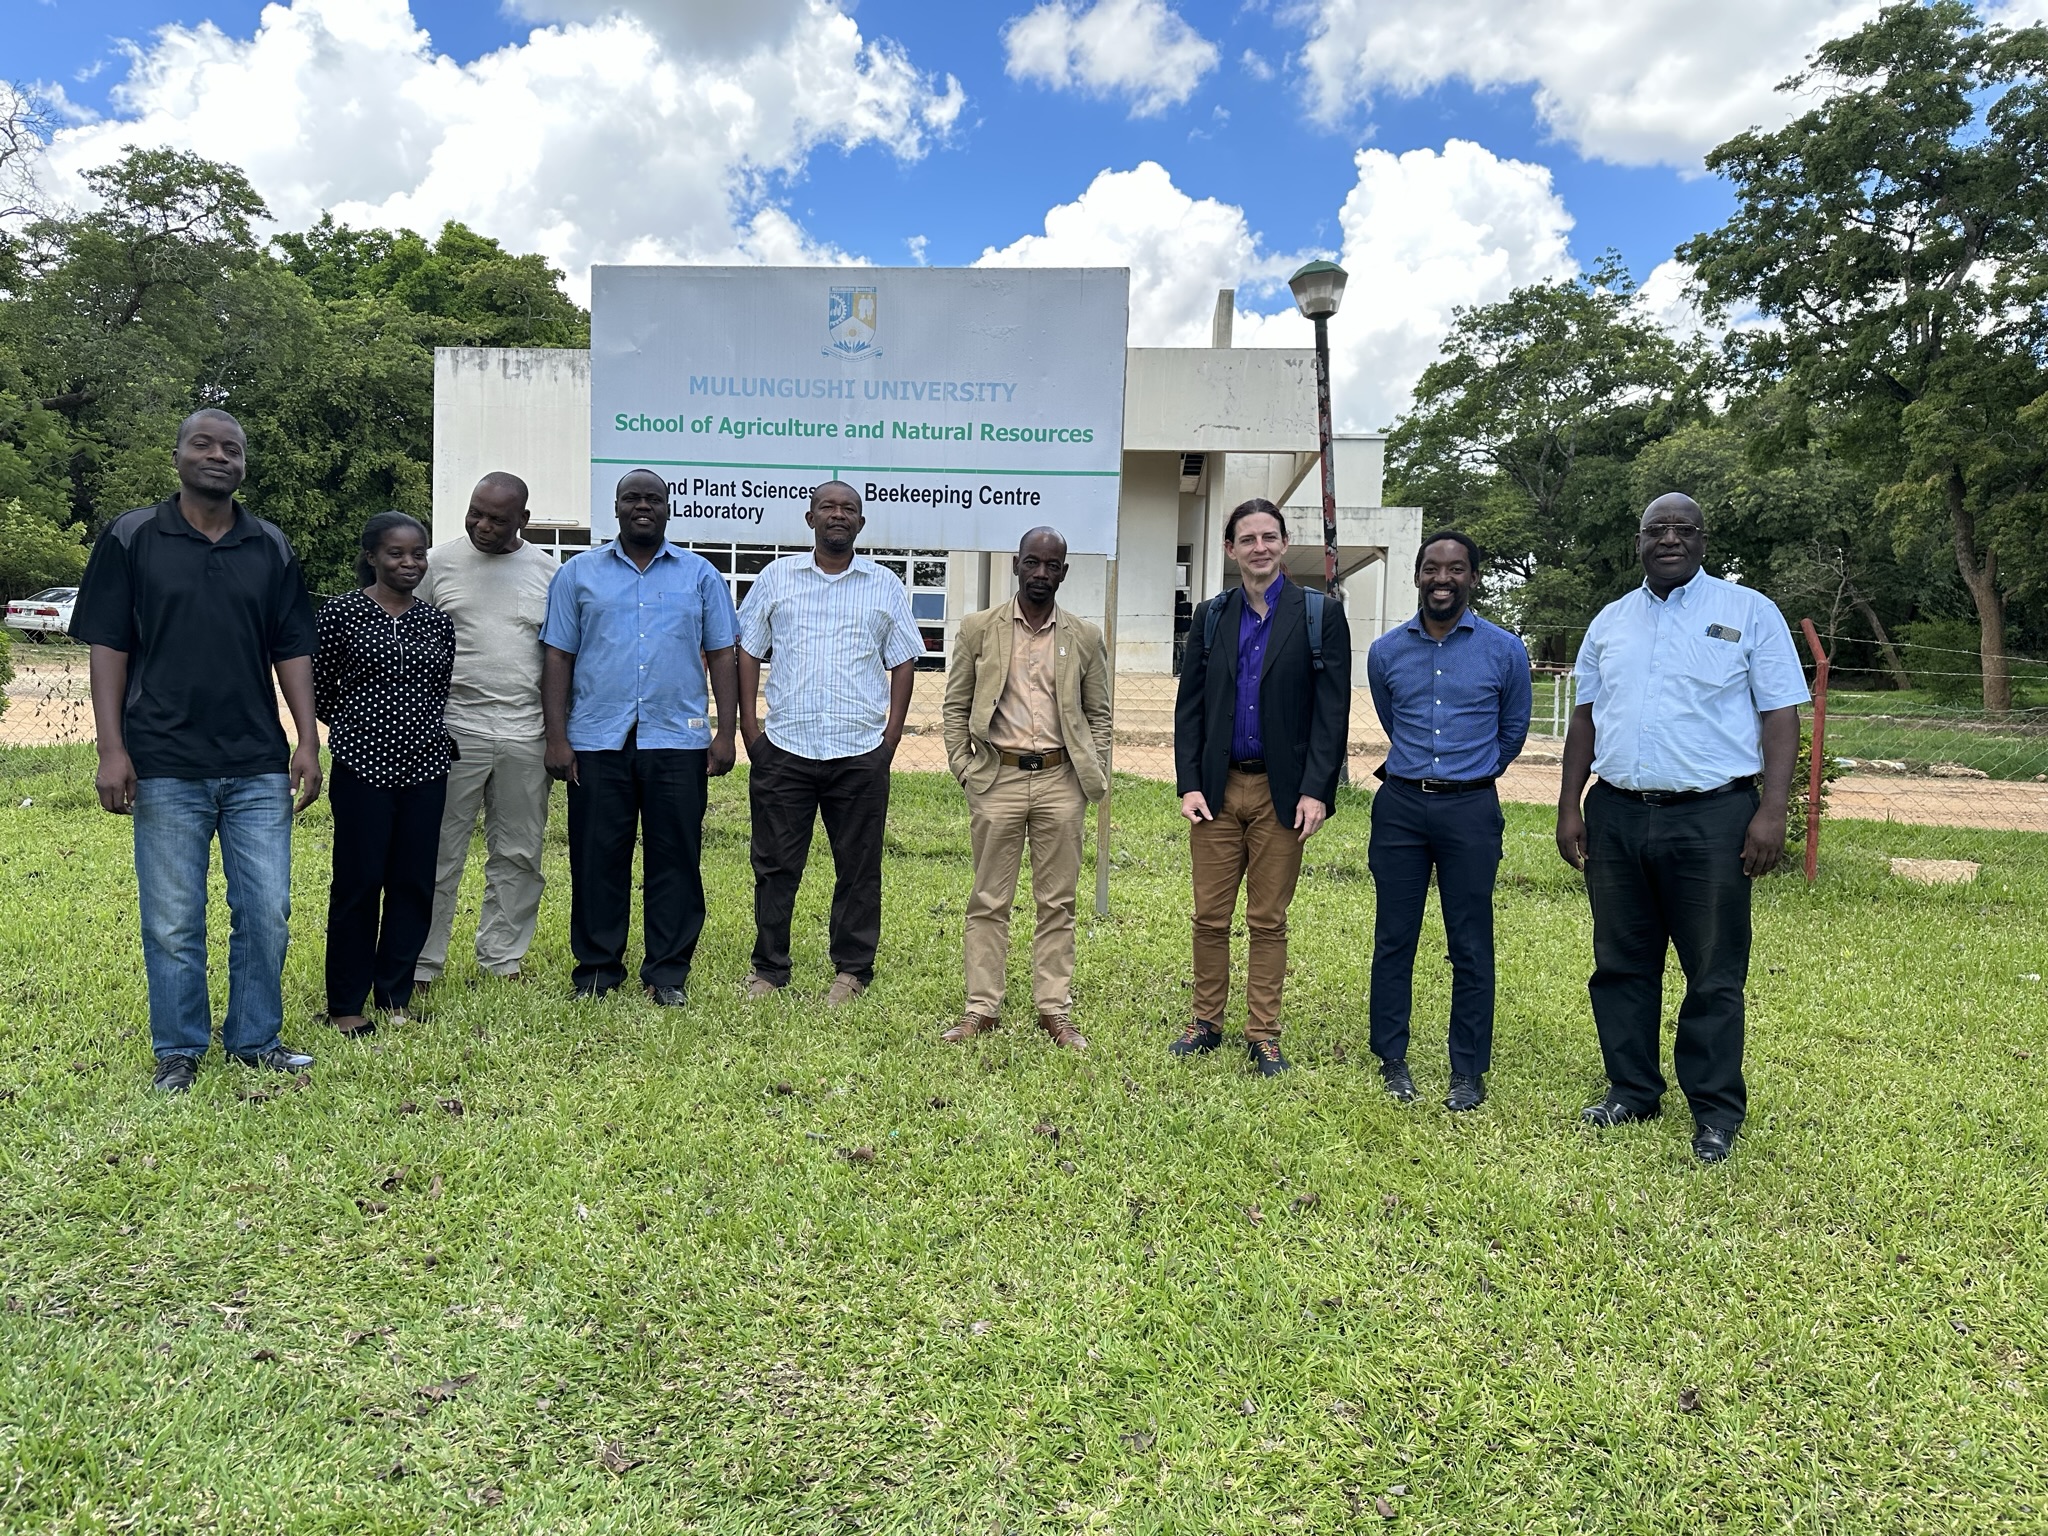 Jay Sterling Gregg, senior researcher at UNEP Copenhagen Climate Centre meets with faculty members of the School of Agriculture and Natural Resources at Mulugushi University, Zambia.